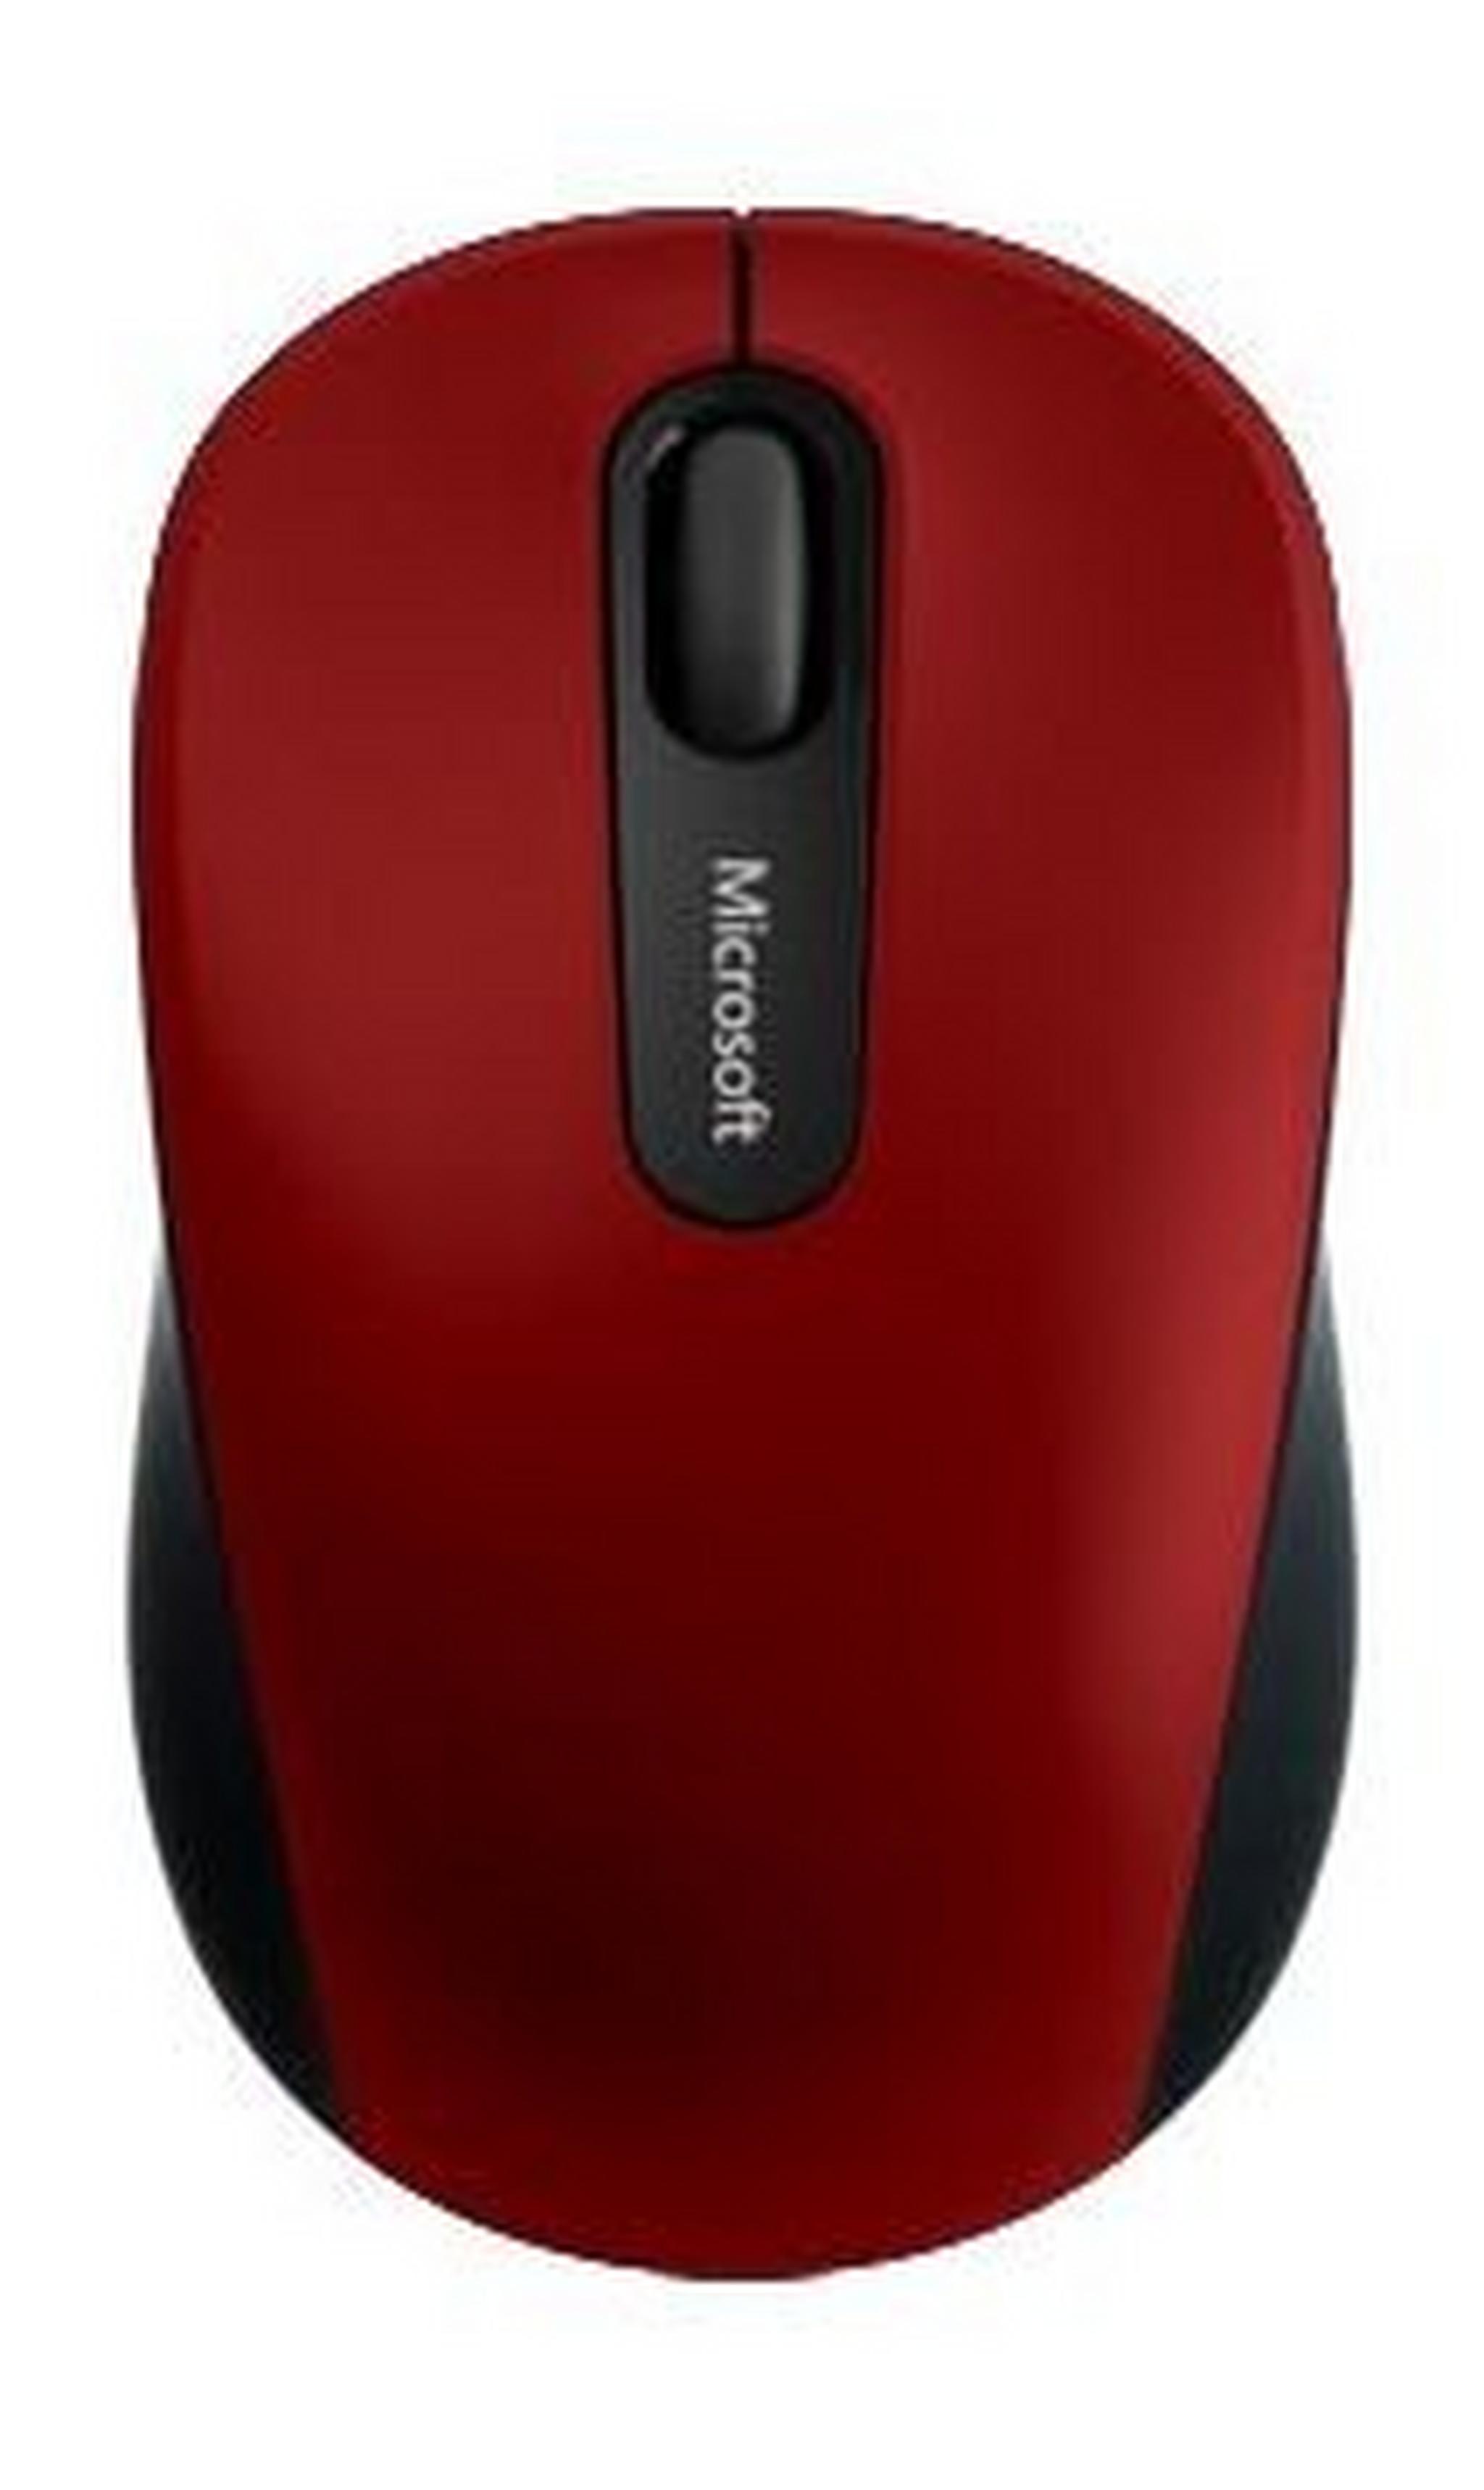 Microsoft Bluetooth Mobile Mouse 3600 (PN7-00014) - Red